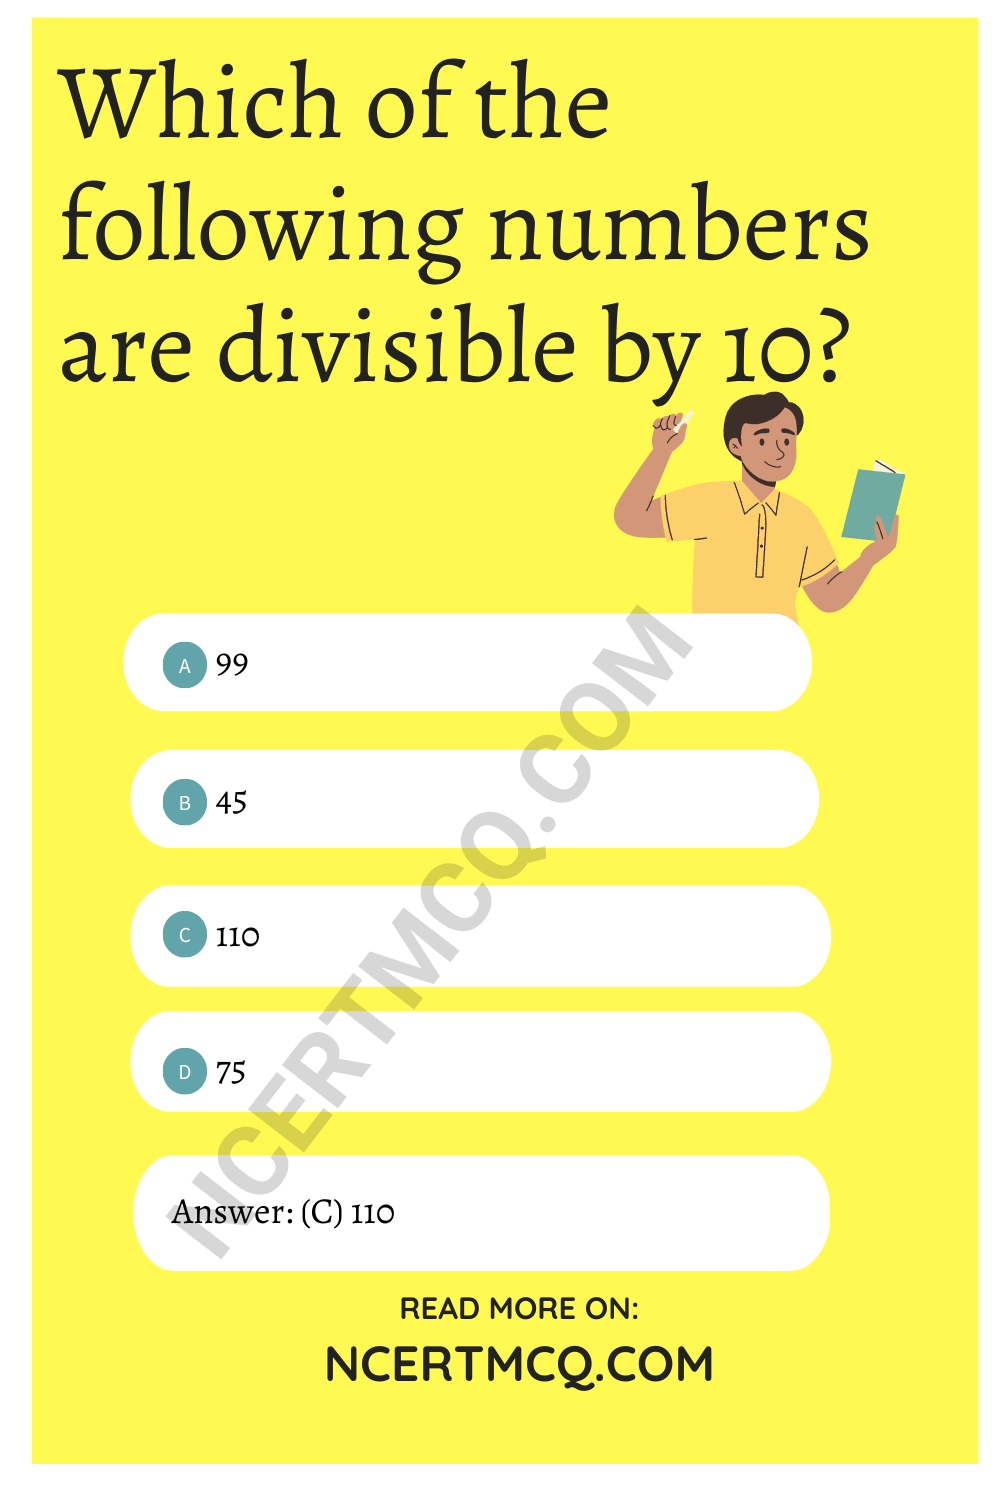 Which of the following numbers are divisible by 10?